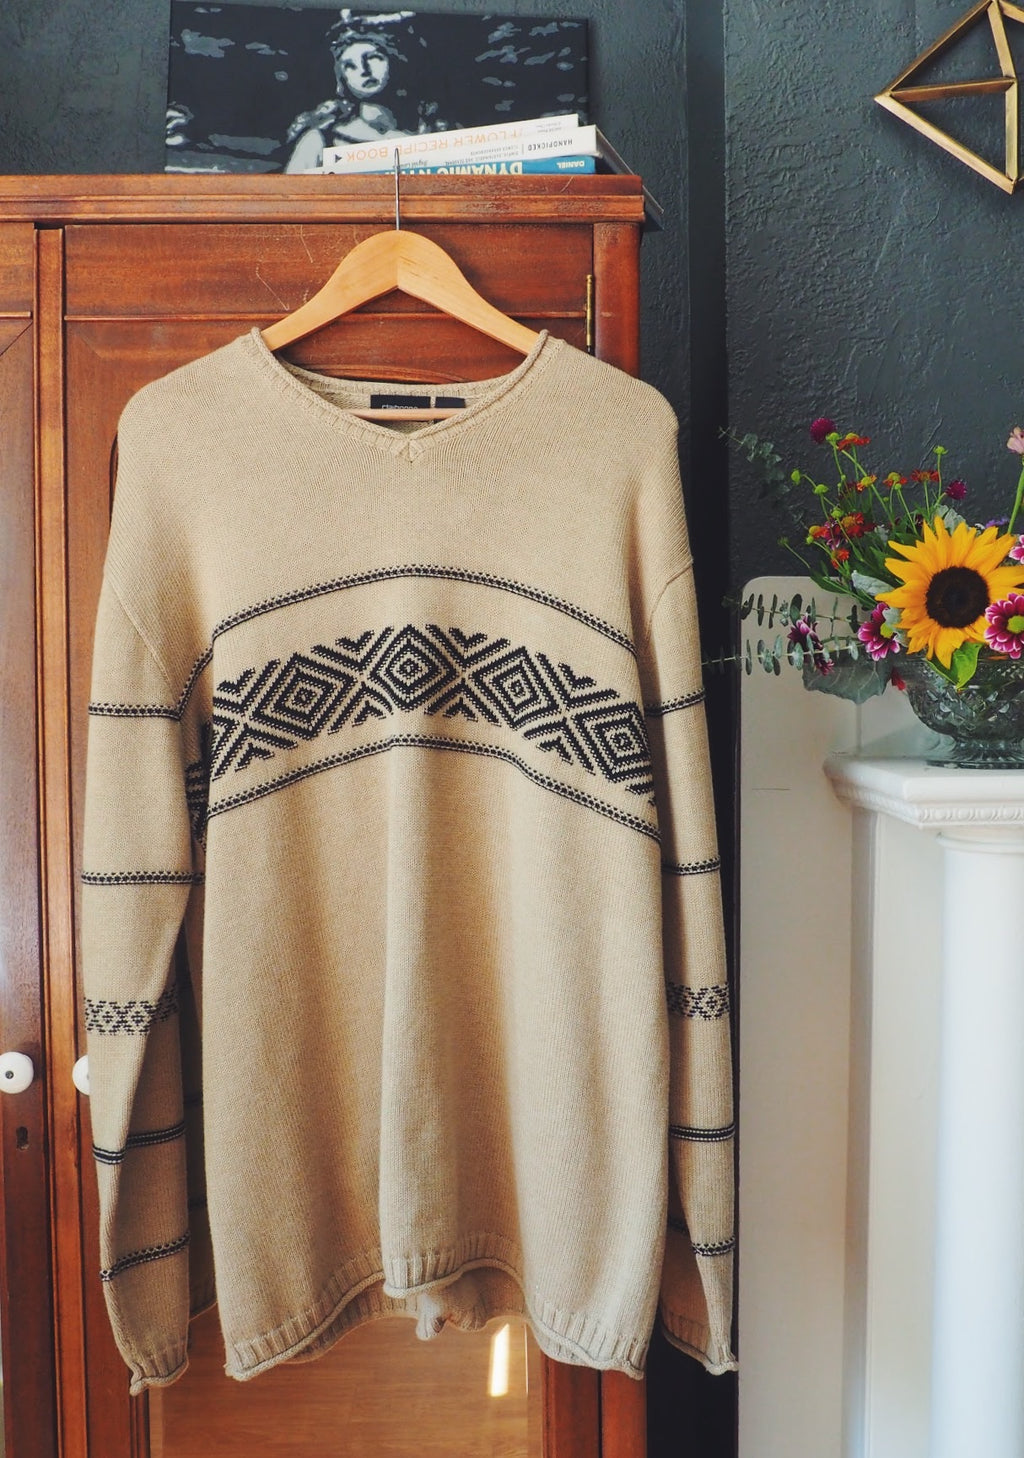 90's Graphic Over-sized Men's Sweater